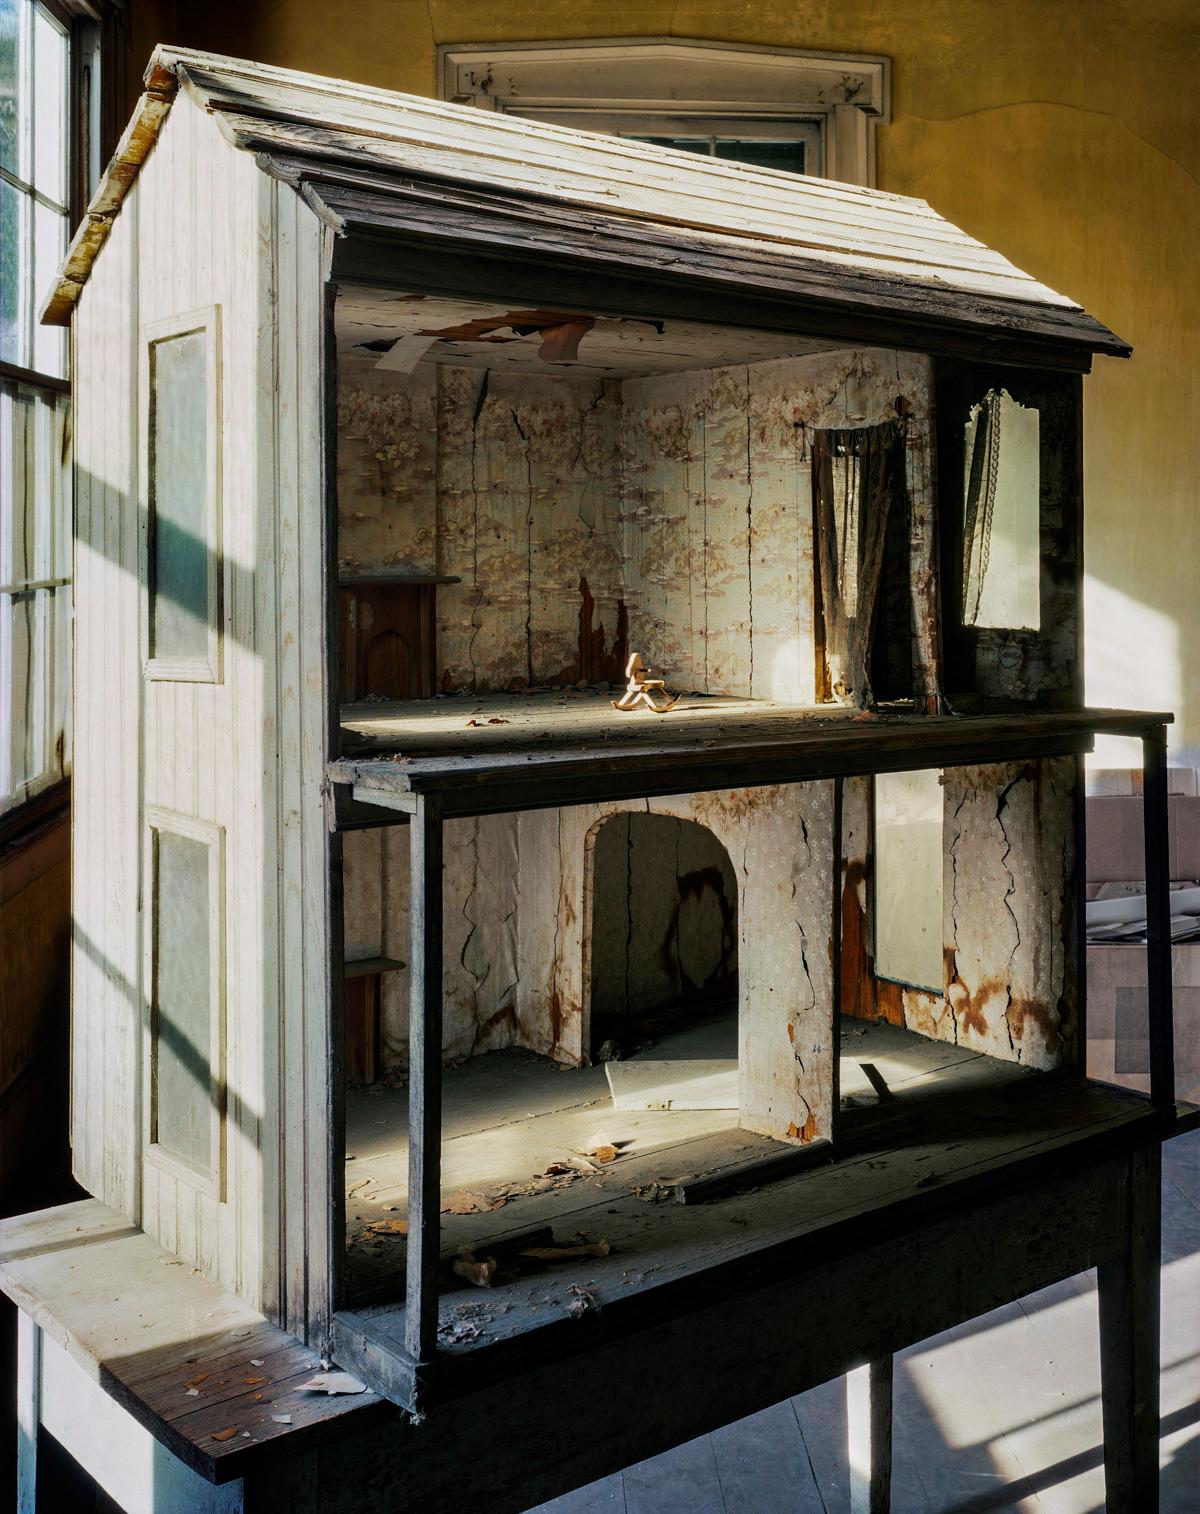 Andrew Moore - Doll House, Photography 2016, Printed After